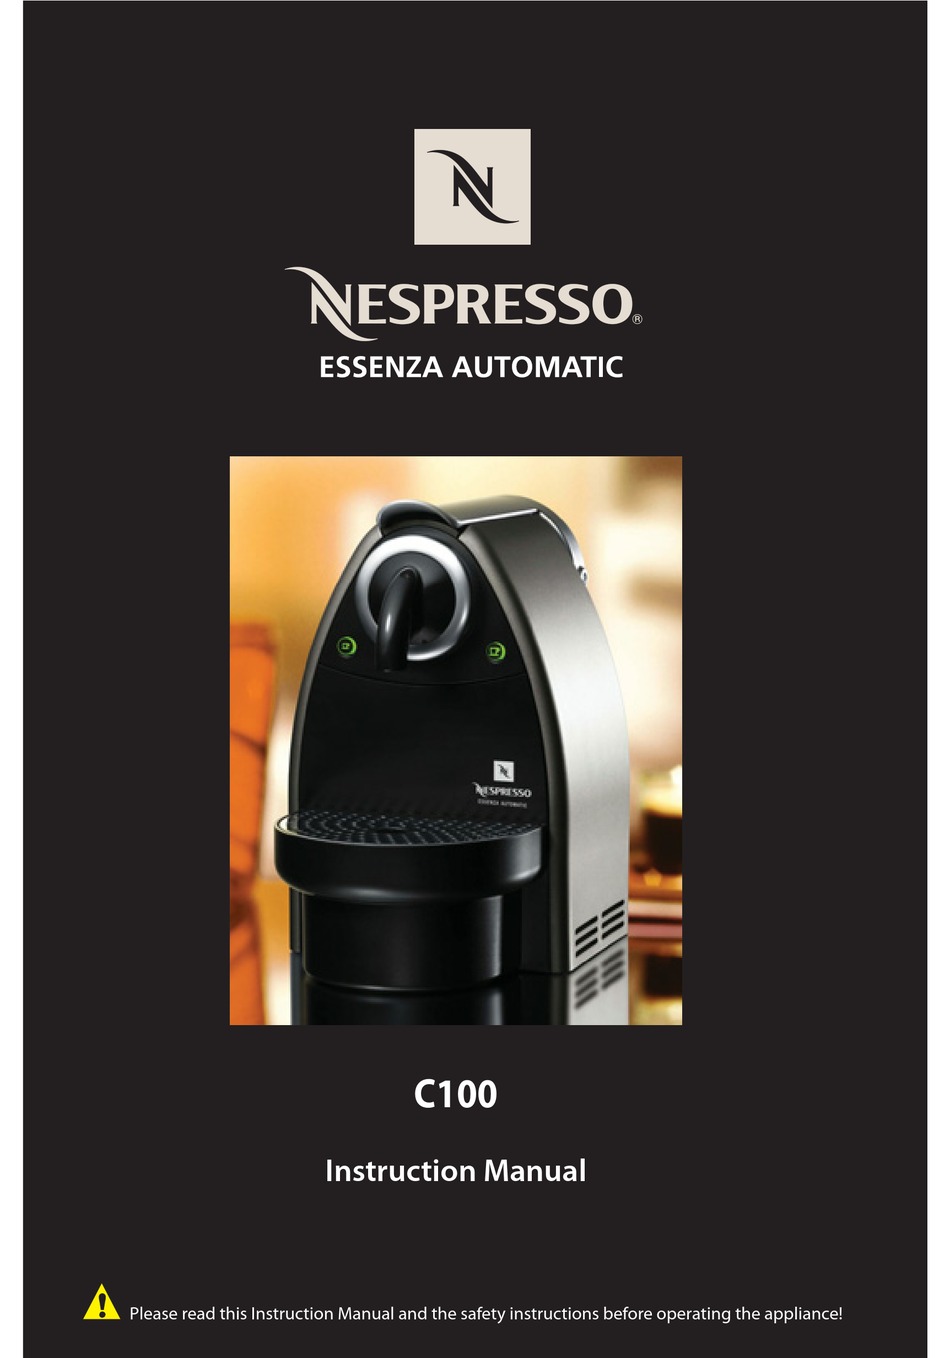 Overskyet forslag smal Troubleshooting; Specifications; Optional Accessory - Nespresso ESSENZA  AUTOMATIC C100 Instruction Manual [Page 6] | ManualsLib